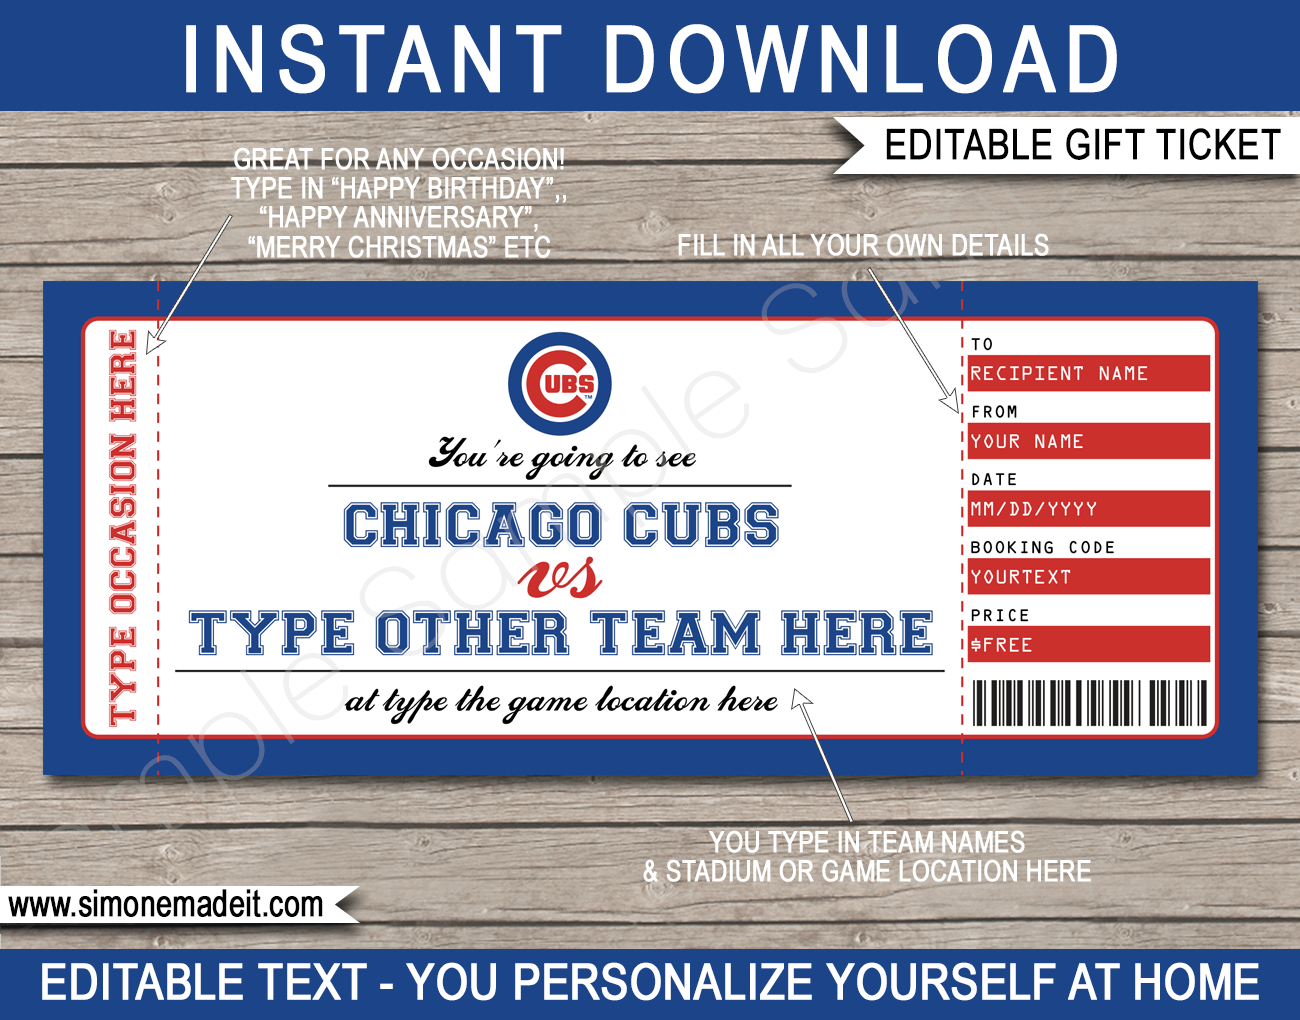 All the Chicago Cubs giveaways, special ticket offers through the